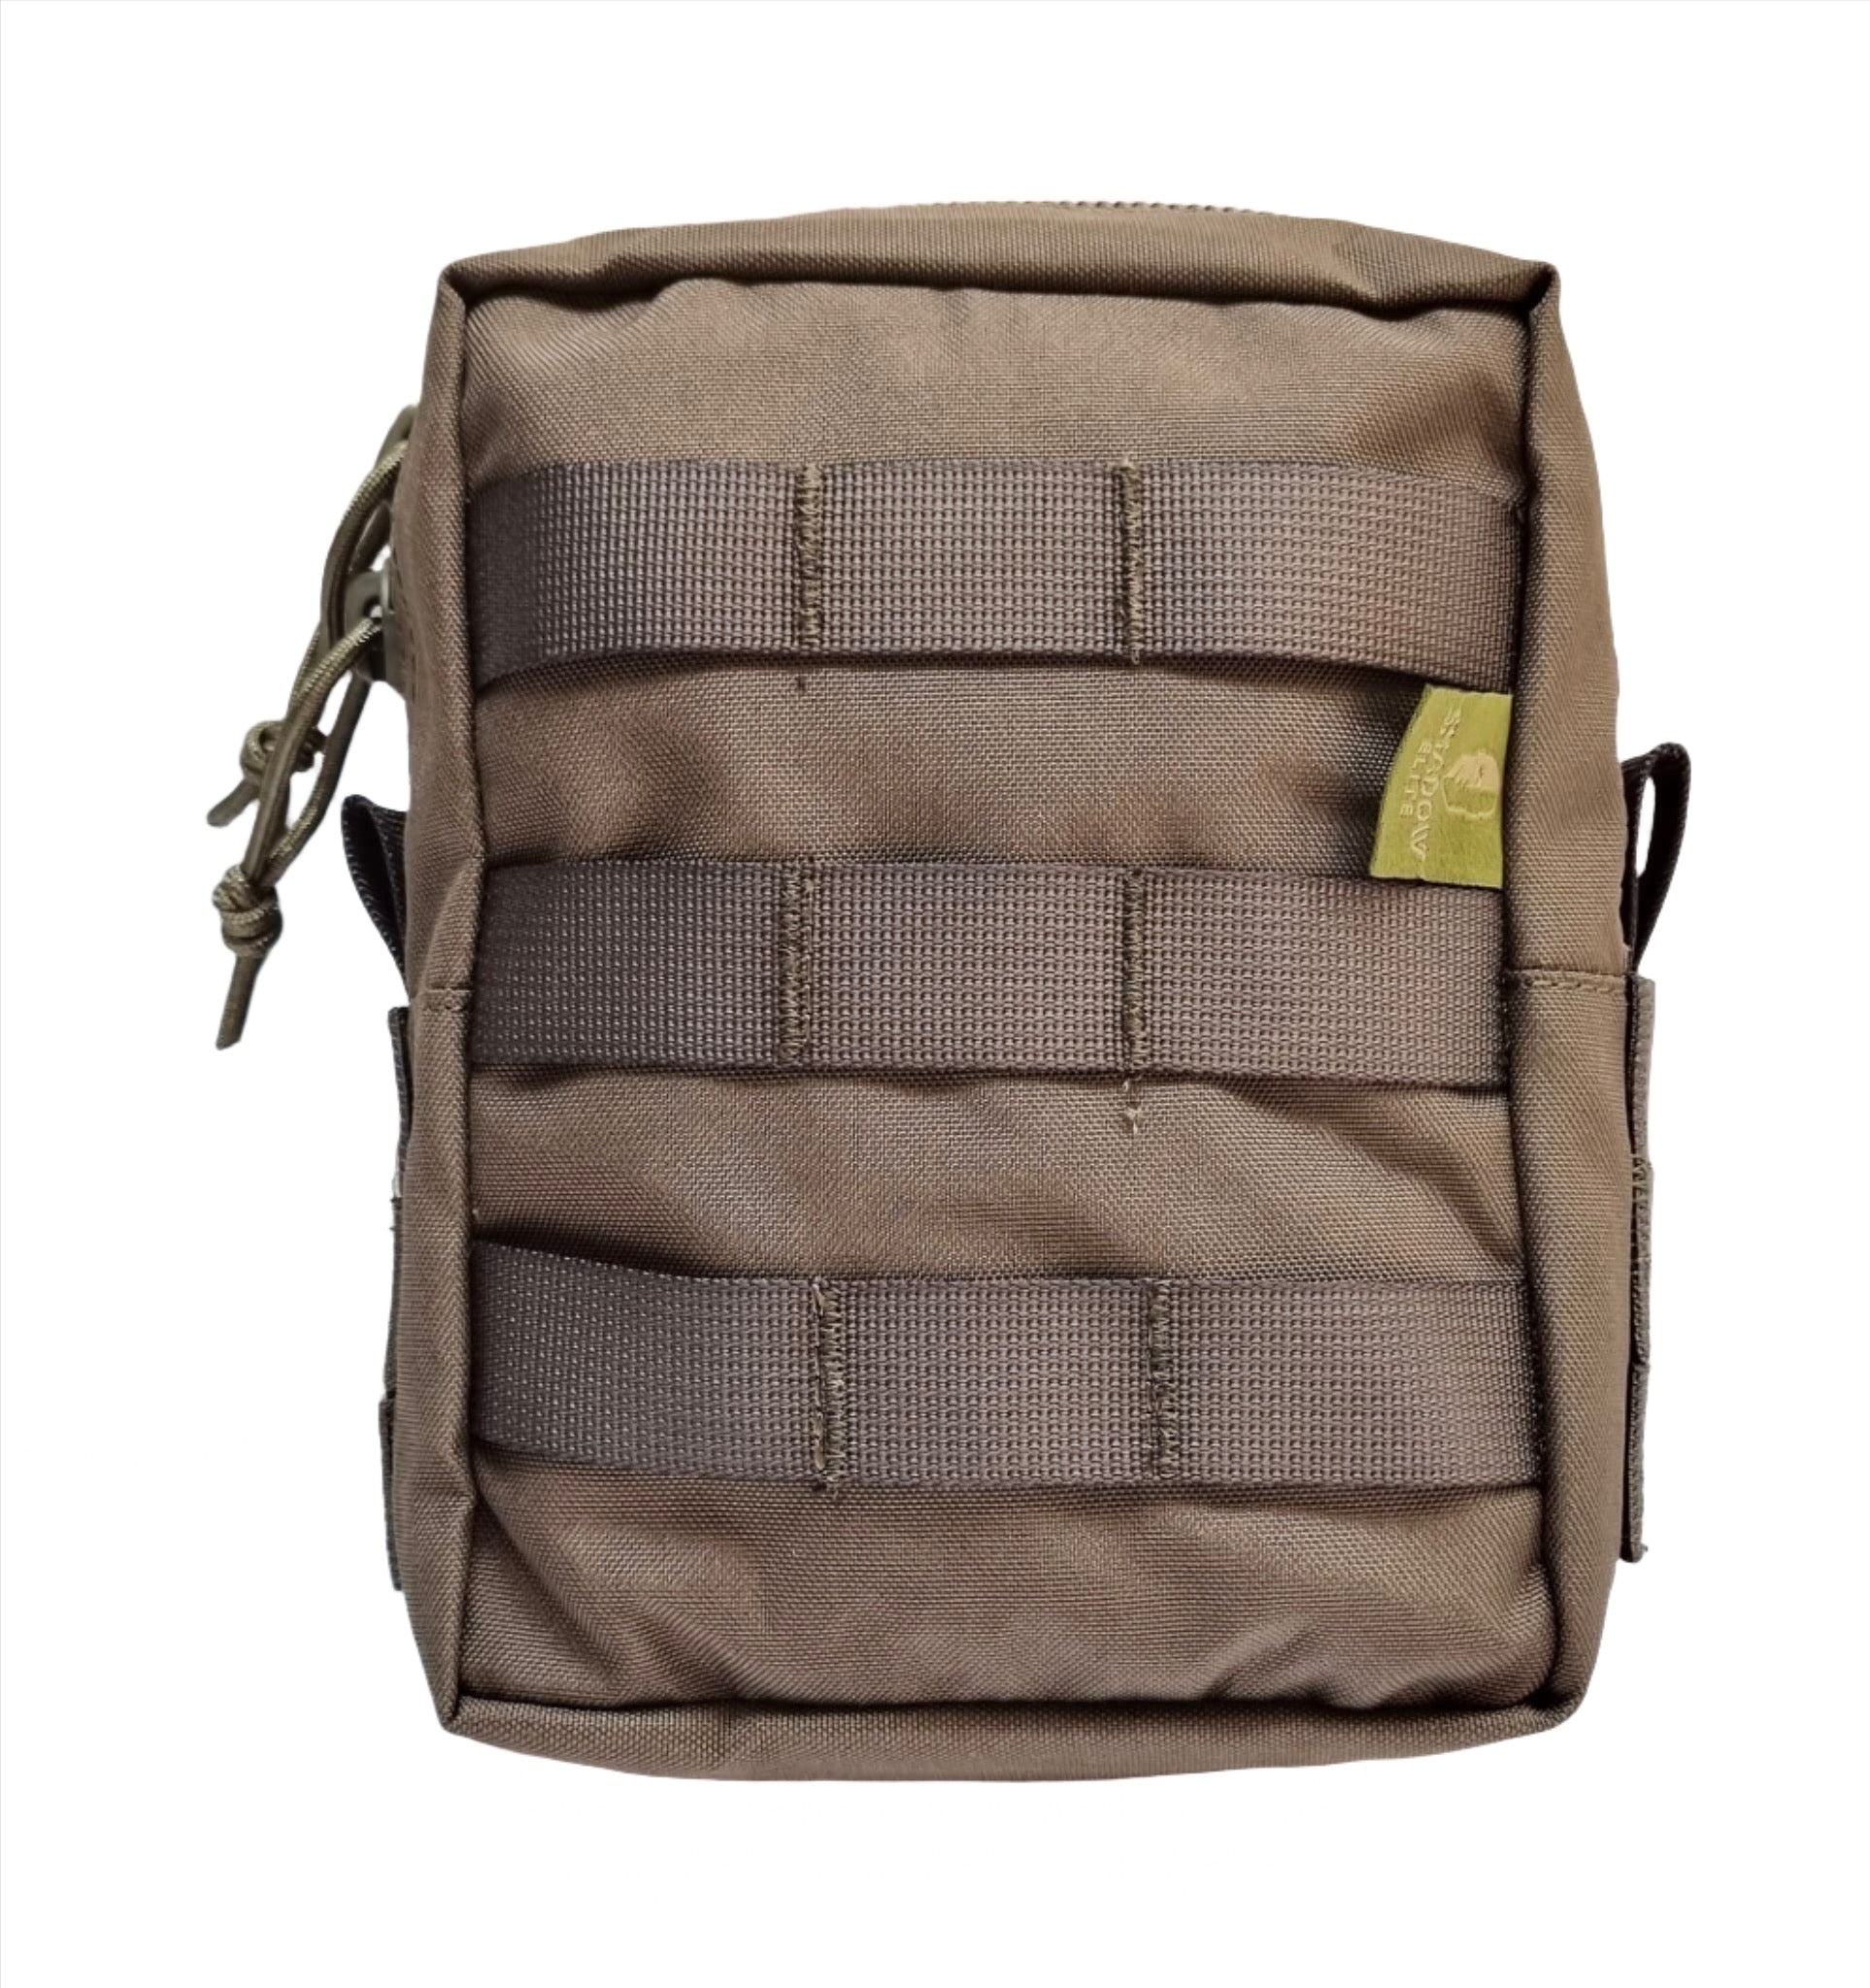  Shadow Strategic Multi Purpose Utility pouch  Color Army Green